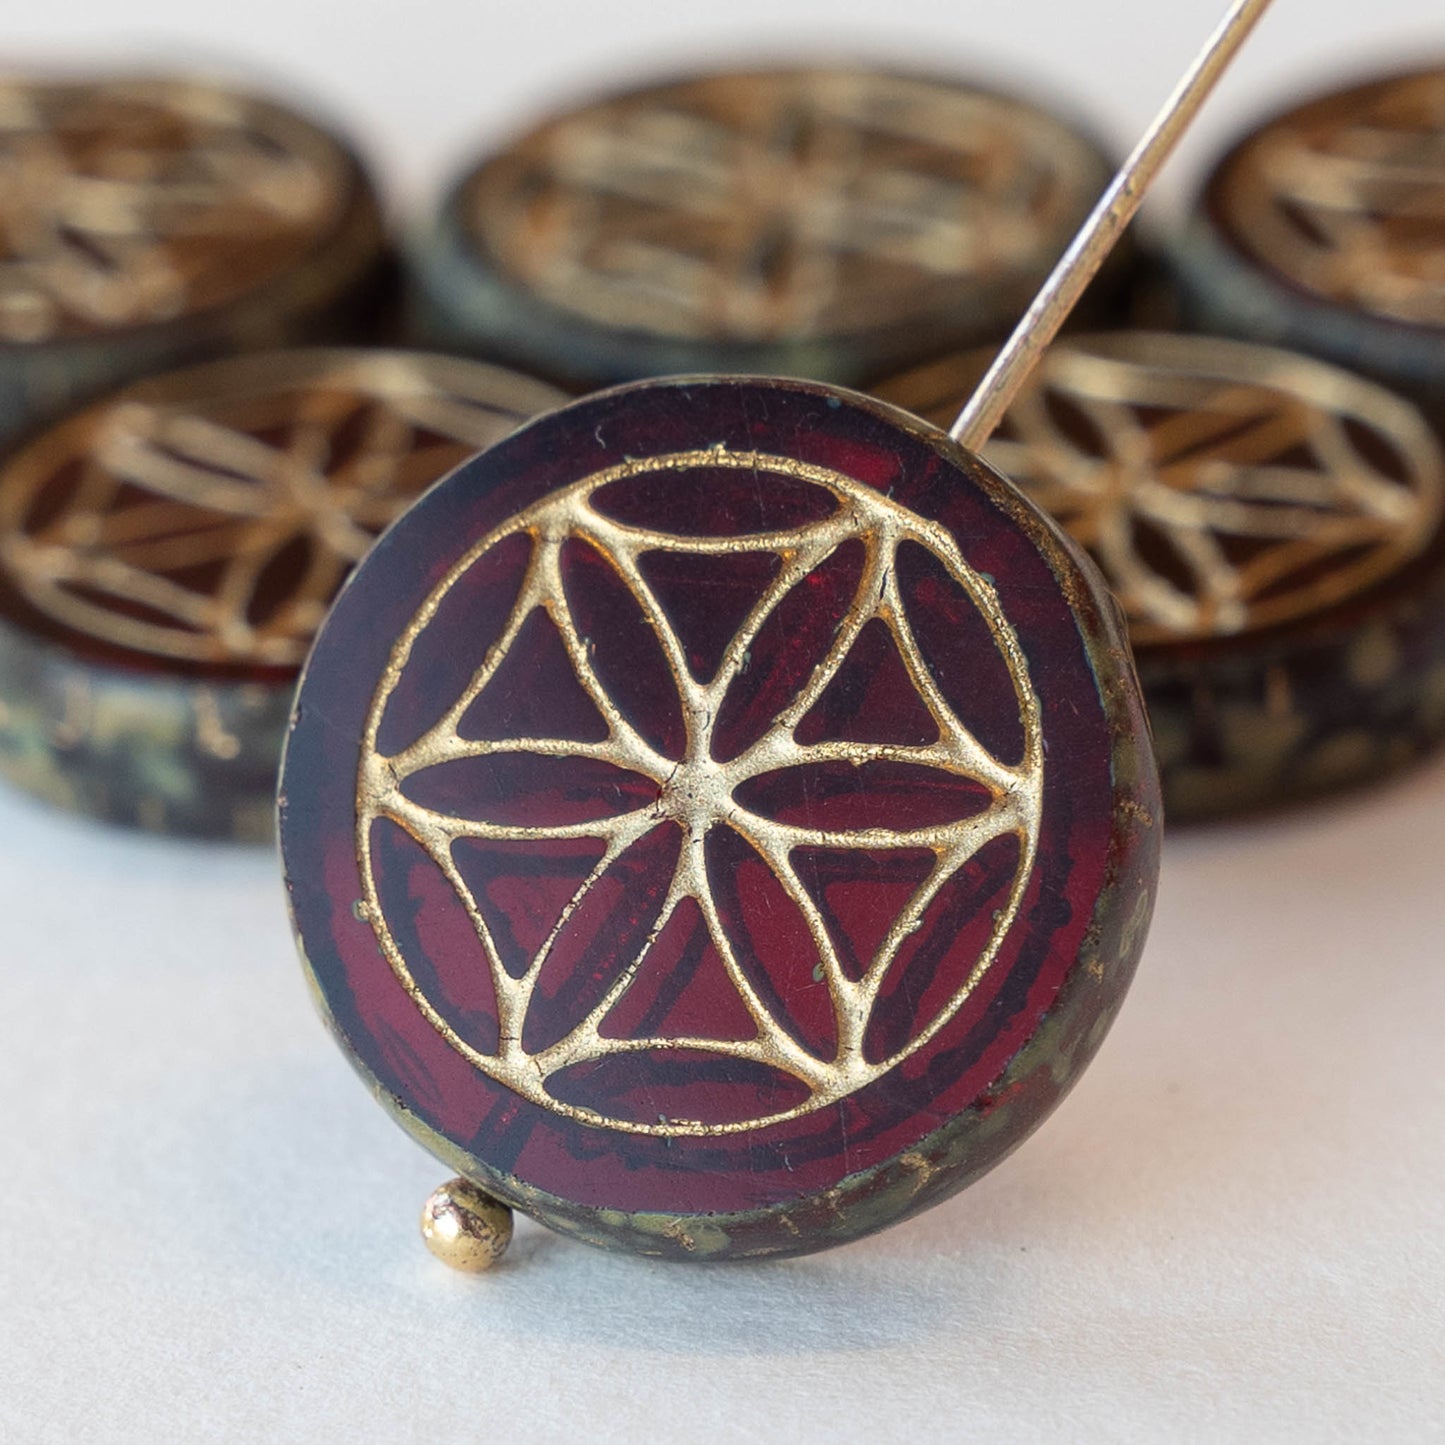 19mm Flower of Life Coin Bead - Red with Gold Wash - 2 beads